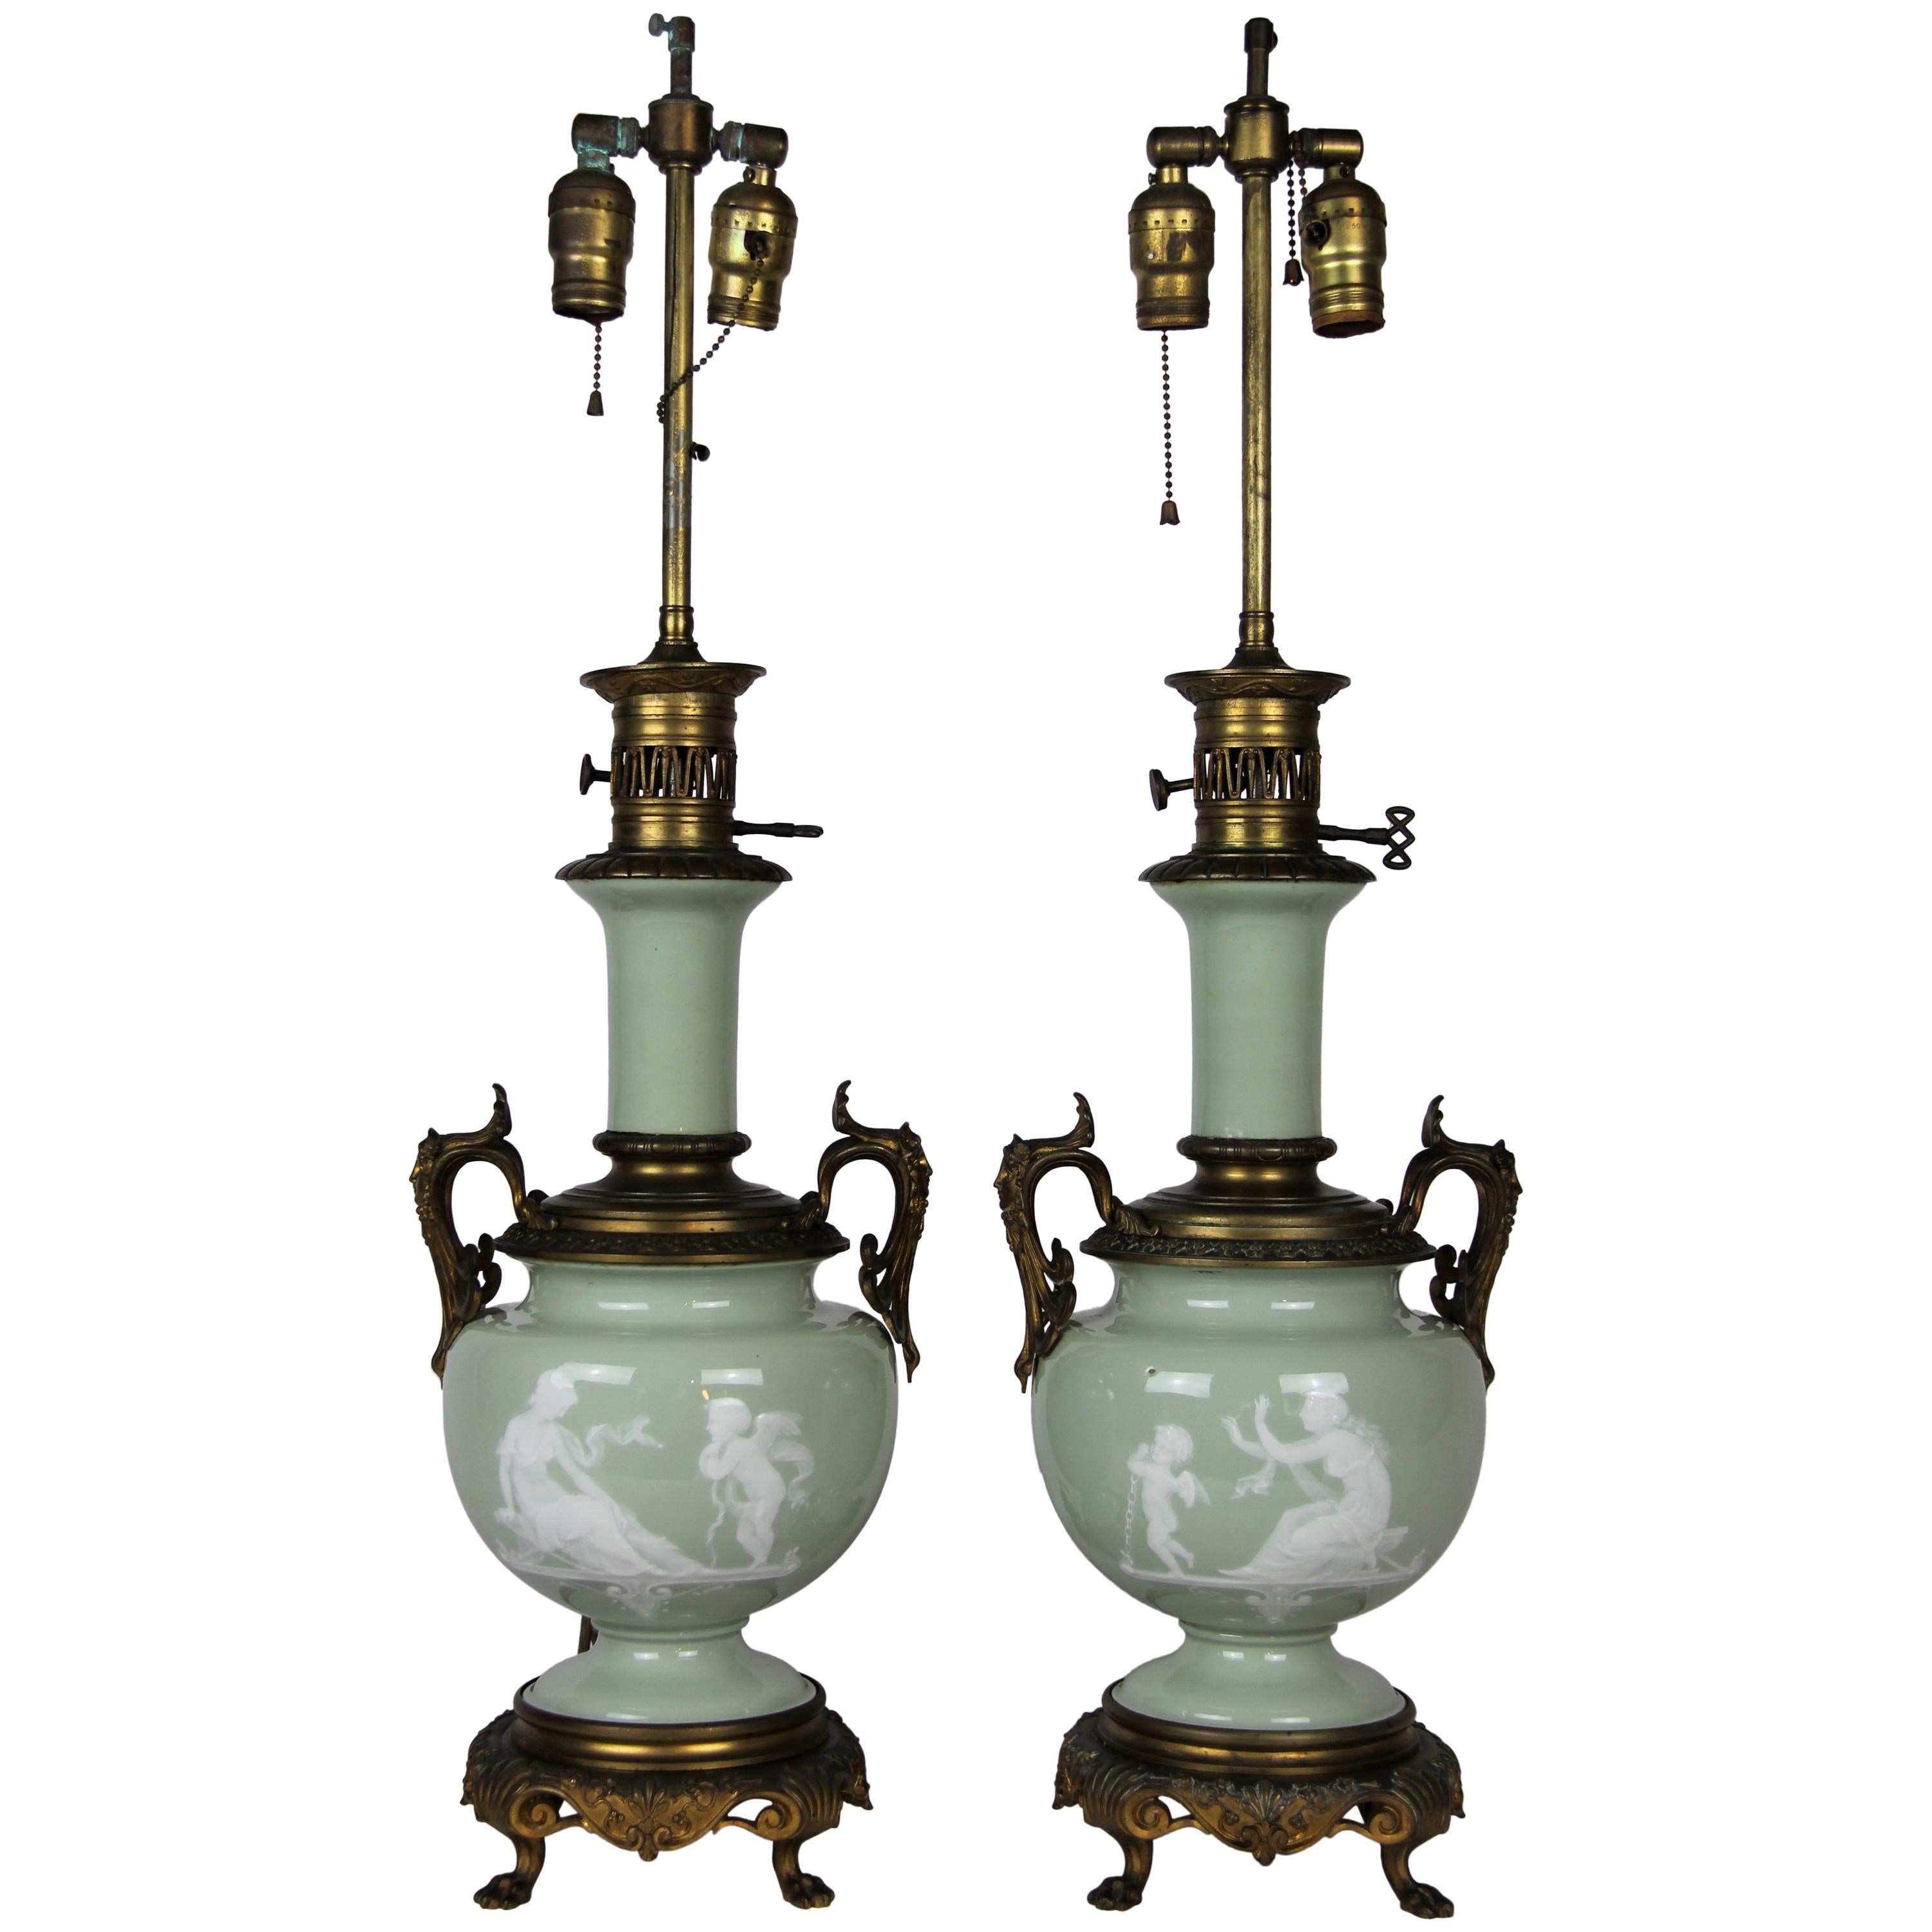 French Gilt Bronze Mounted Double-Sided Pate Sur Pate Celadon Ground Lamps, Pair For Sale